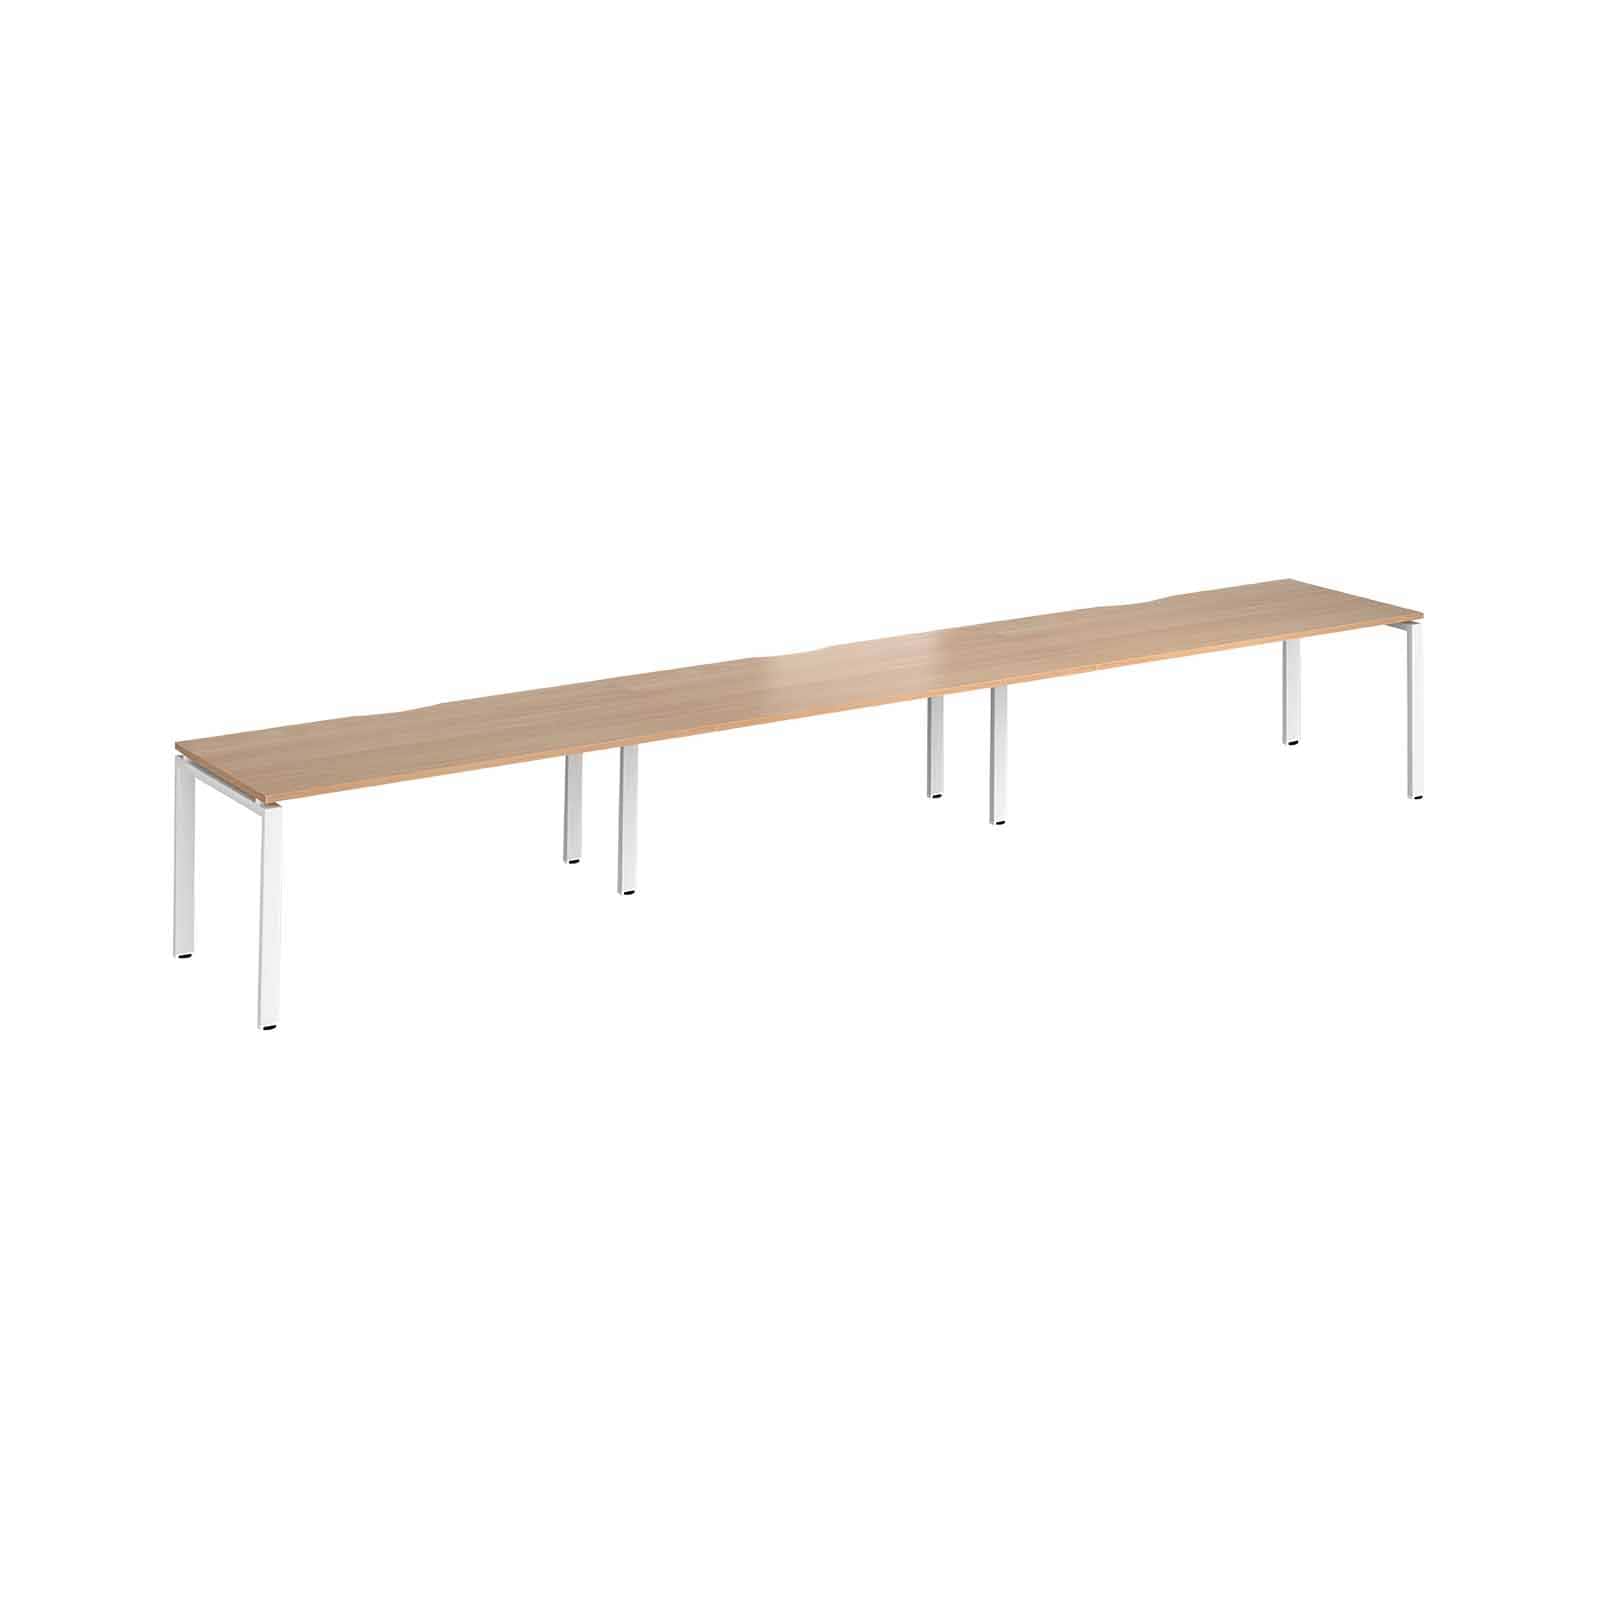 MADE TO ORDER 3 Person Single Row Bench Desk W1000mm x D600mm x H740mm